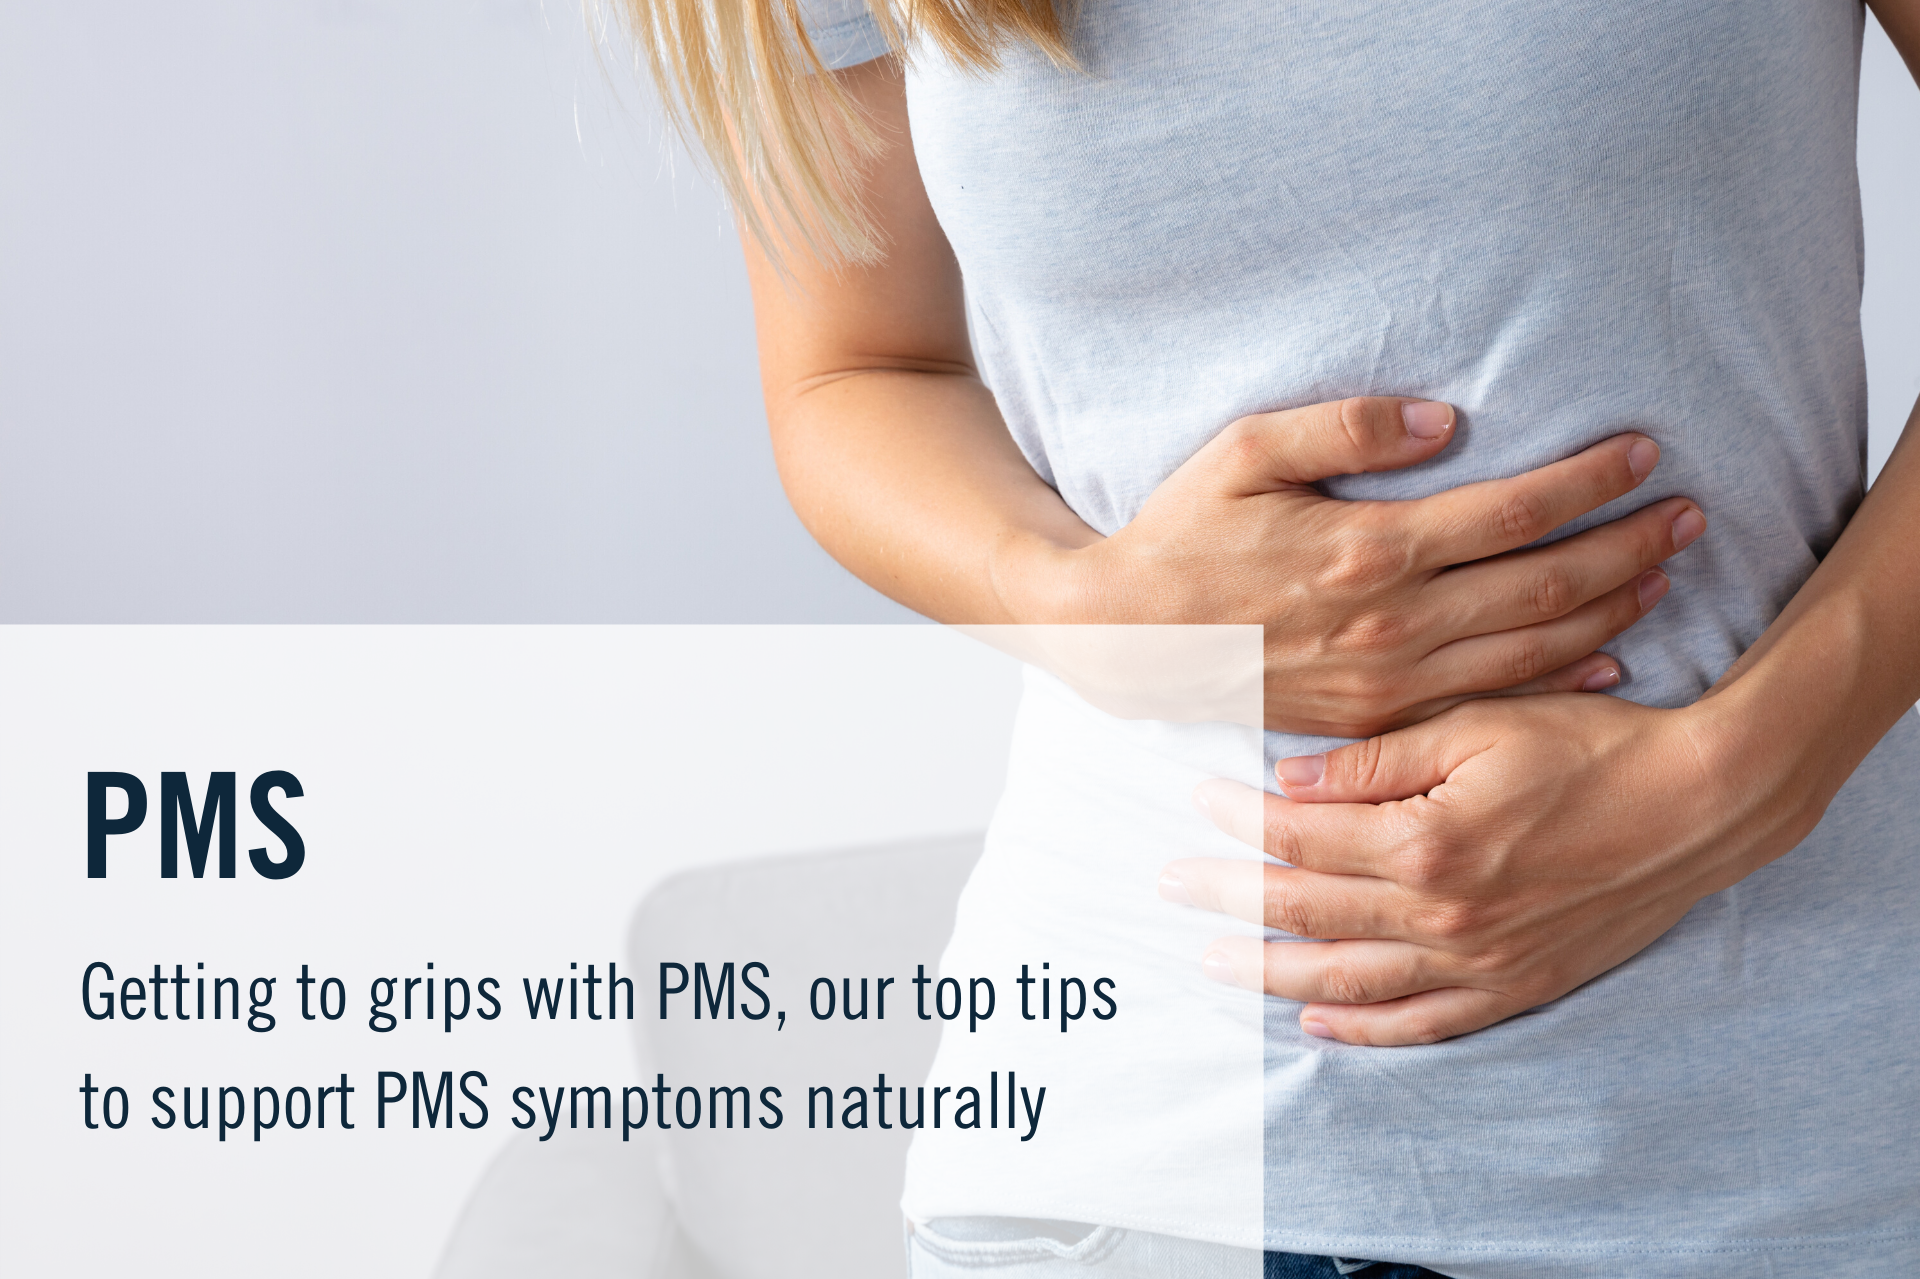  Getting to grips with PMS & natural ways to support it